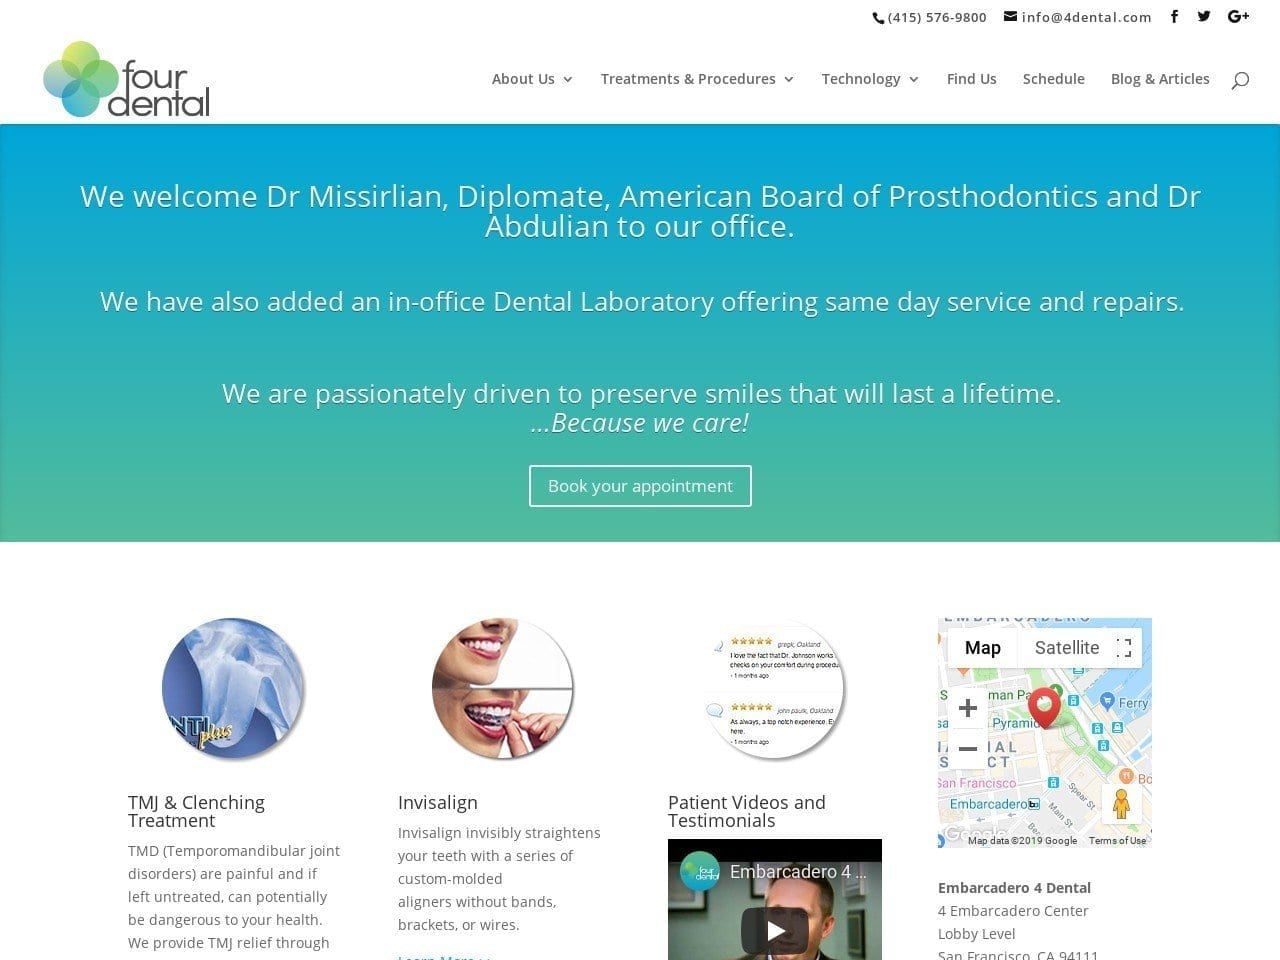 Embarcadero 4 Dental Dentistry with a Womans Touch Website Screenshot from 4dental.com